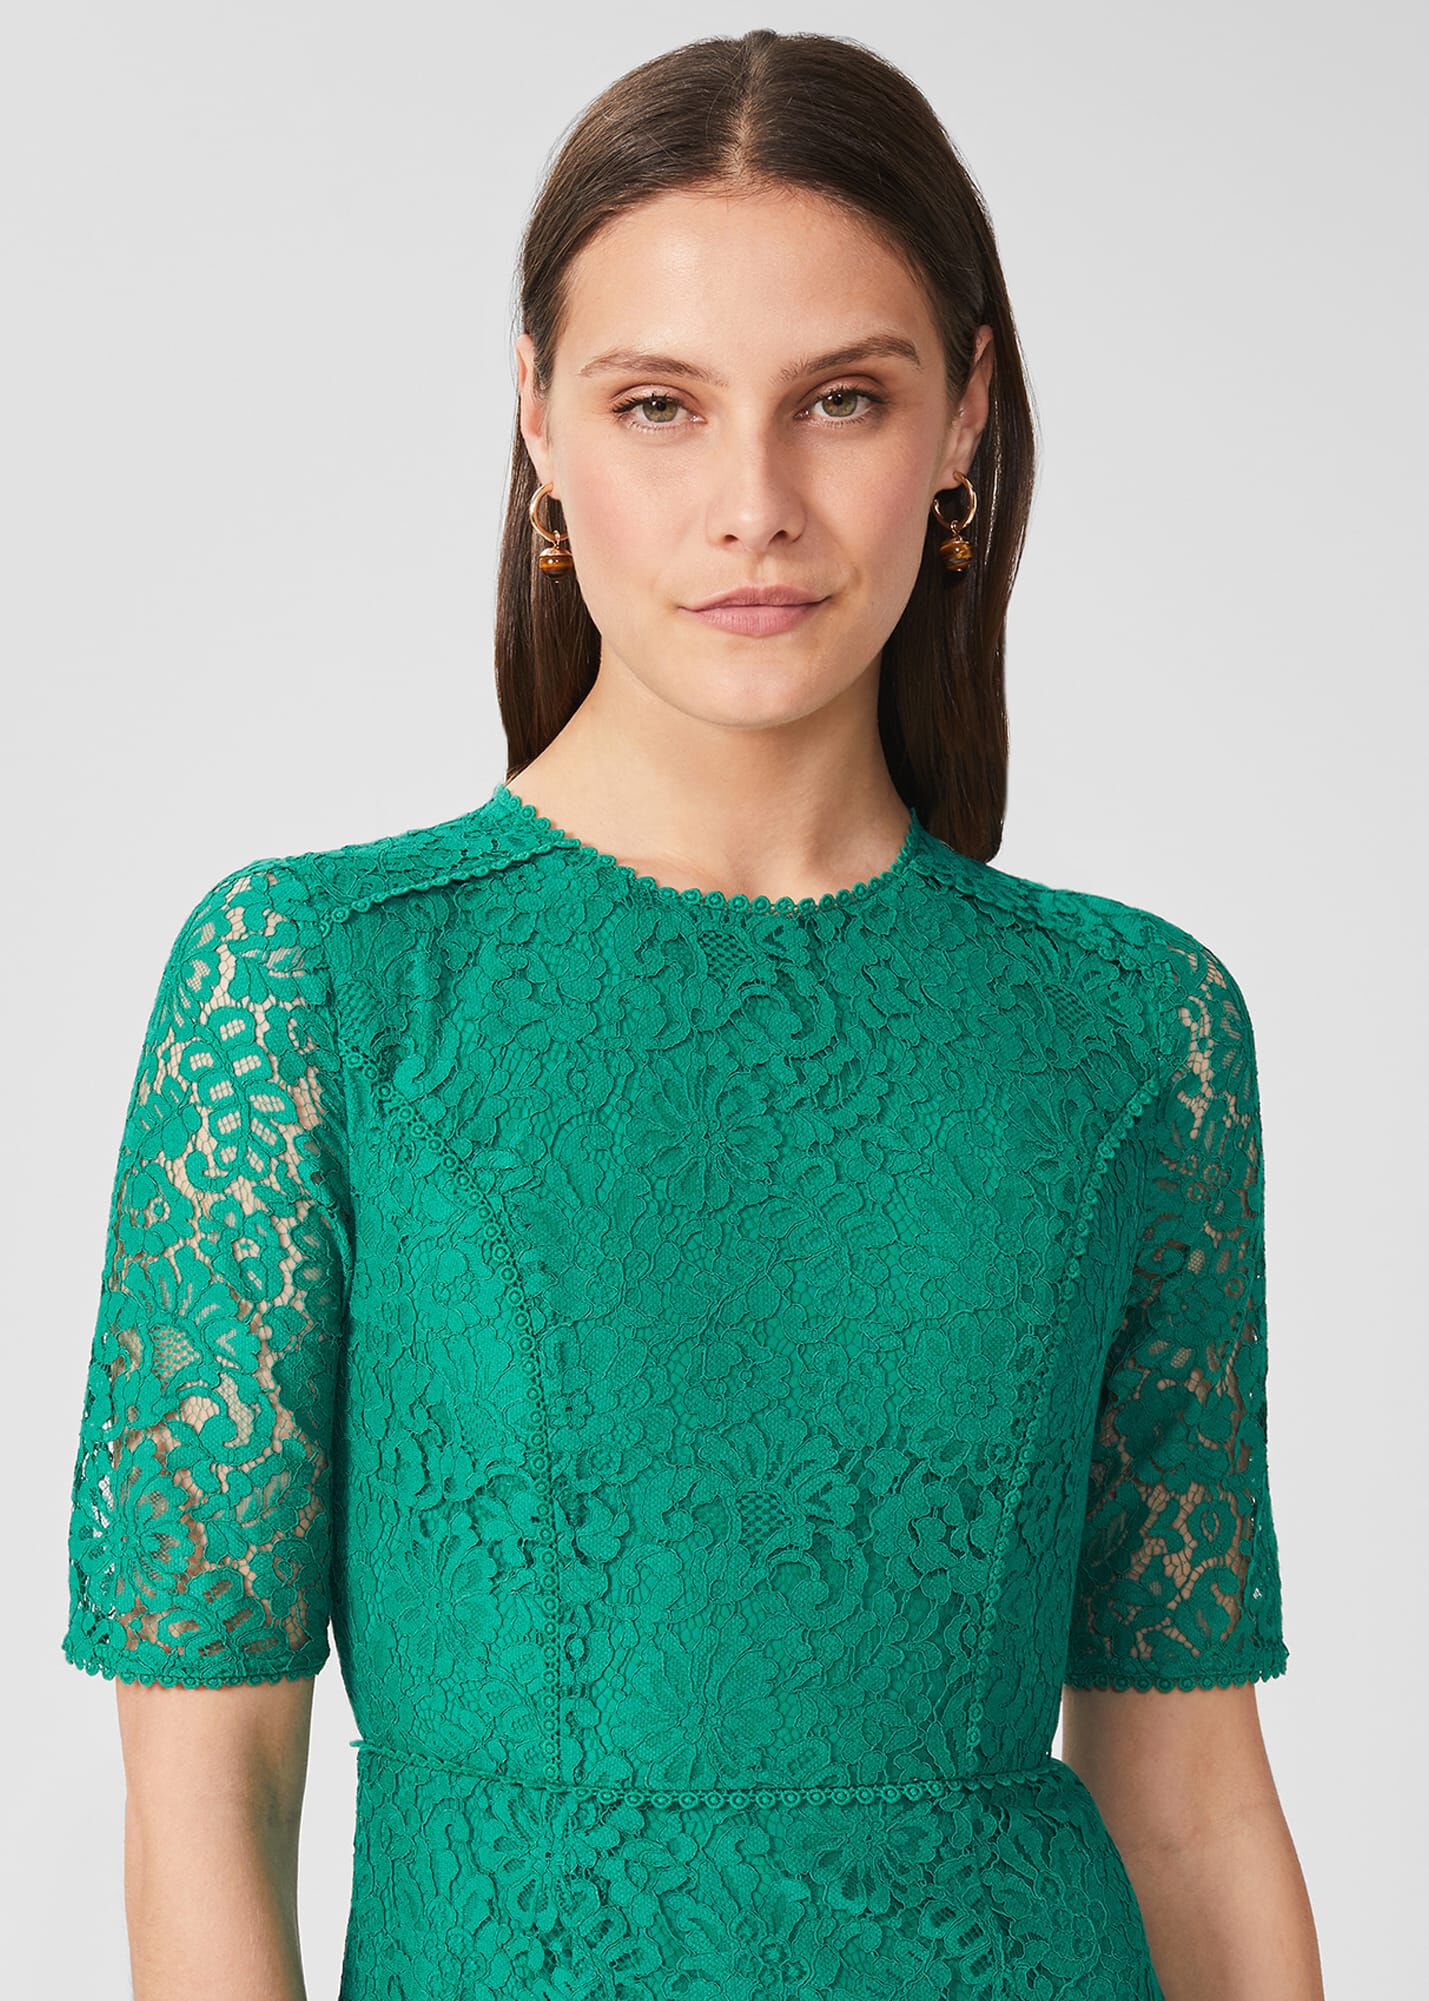 hobbs penny floral lace dress